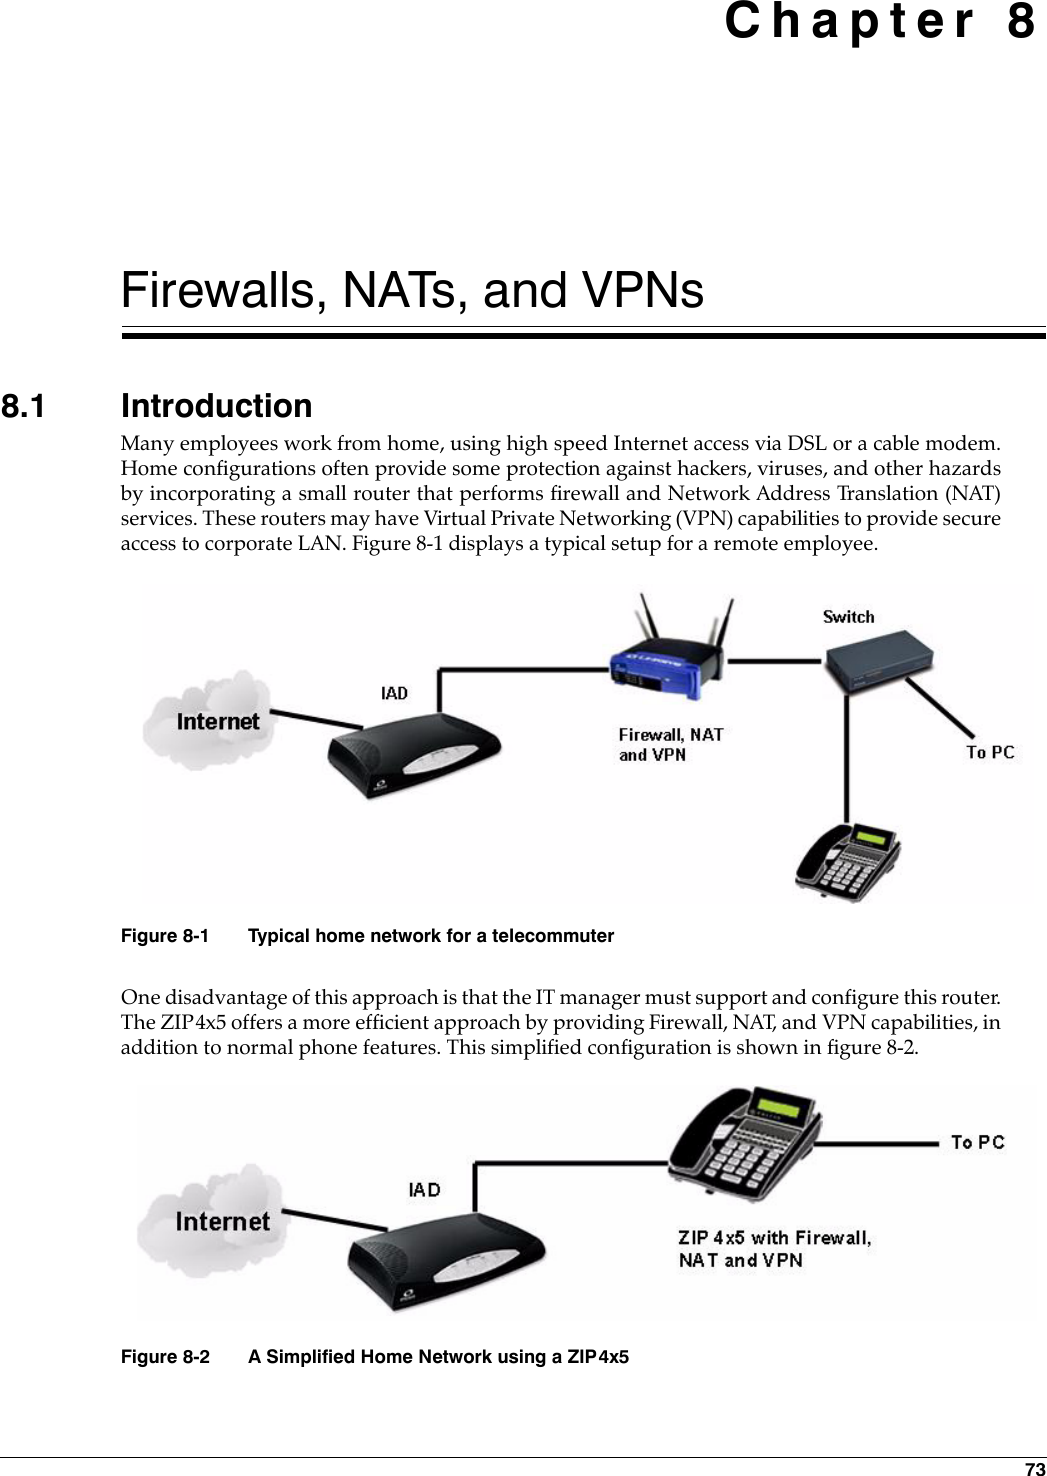 73 Chapter 8Firewalls, NATs, and VPNs8.1 IntroductionMany employees work from home, using high speed Internet access via DSL or a cable modem.Home configurations often provide some protection against hackers, viruses, and other hazardsby incorporating a small router that performs firewall and Network Address Translation (NAT)services. These routers may have Virtual Private Networking (VPN) capabilities to provide secureaccess to corporate LAN. Figure 8-1 displays a typical setup for a remote employee.One disadvantage of this approach is that the IT manager must support and configure this router.The ZIP4x5 offers a more efficient approach by providing Firewall, NAT, and VPN capabilities, inaddition to normal phone features. This simplified configuration is shown in figure 8-2.Figure 8-1 Typical home network for a telecommuterFigure 8-2 A Simplified Home Network using a ZIP4x5